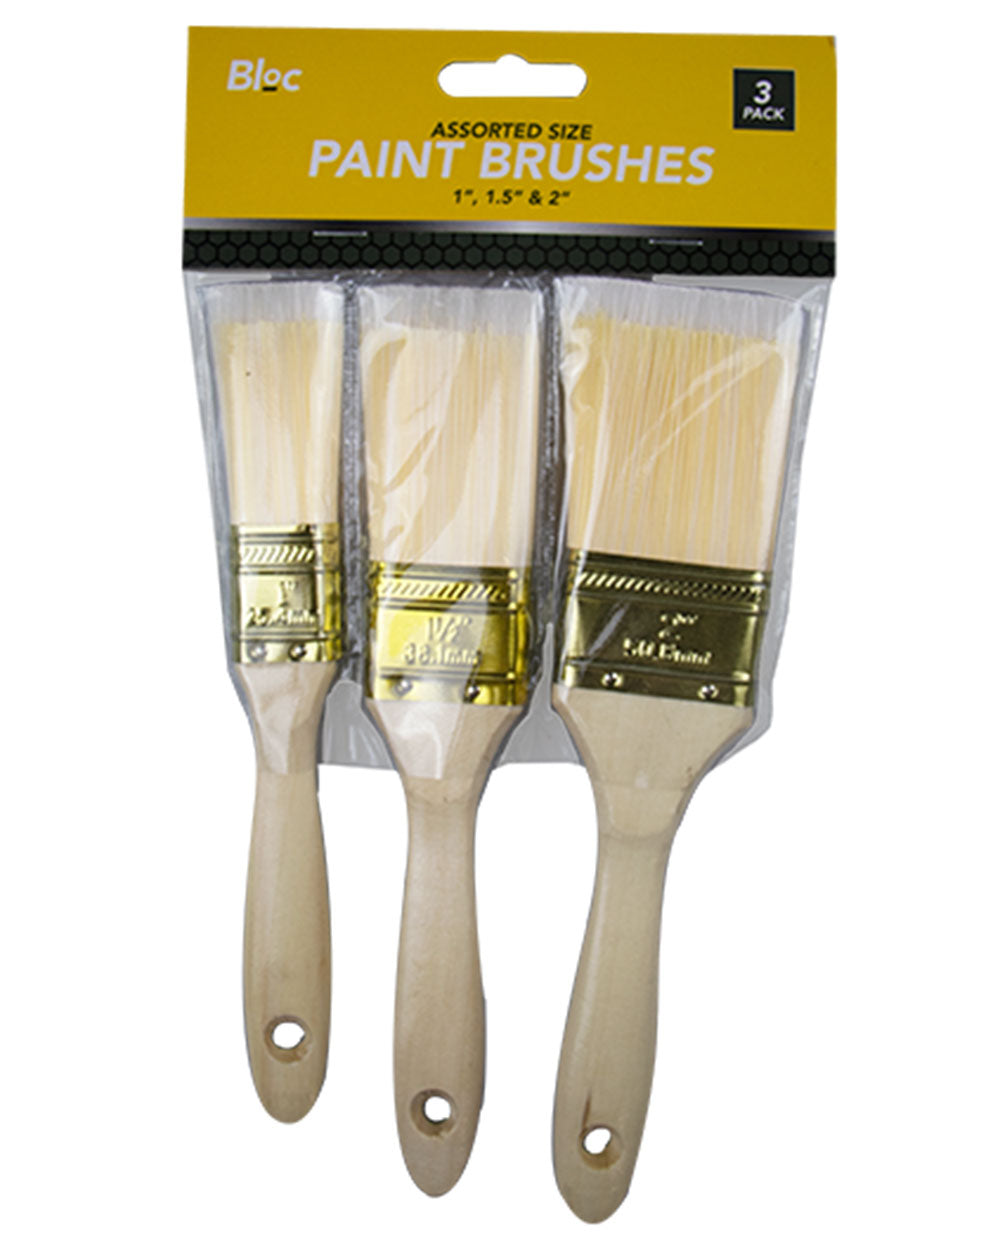 paint brush set pack of 3 in packaging on a white background